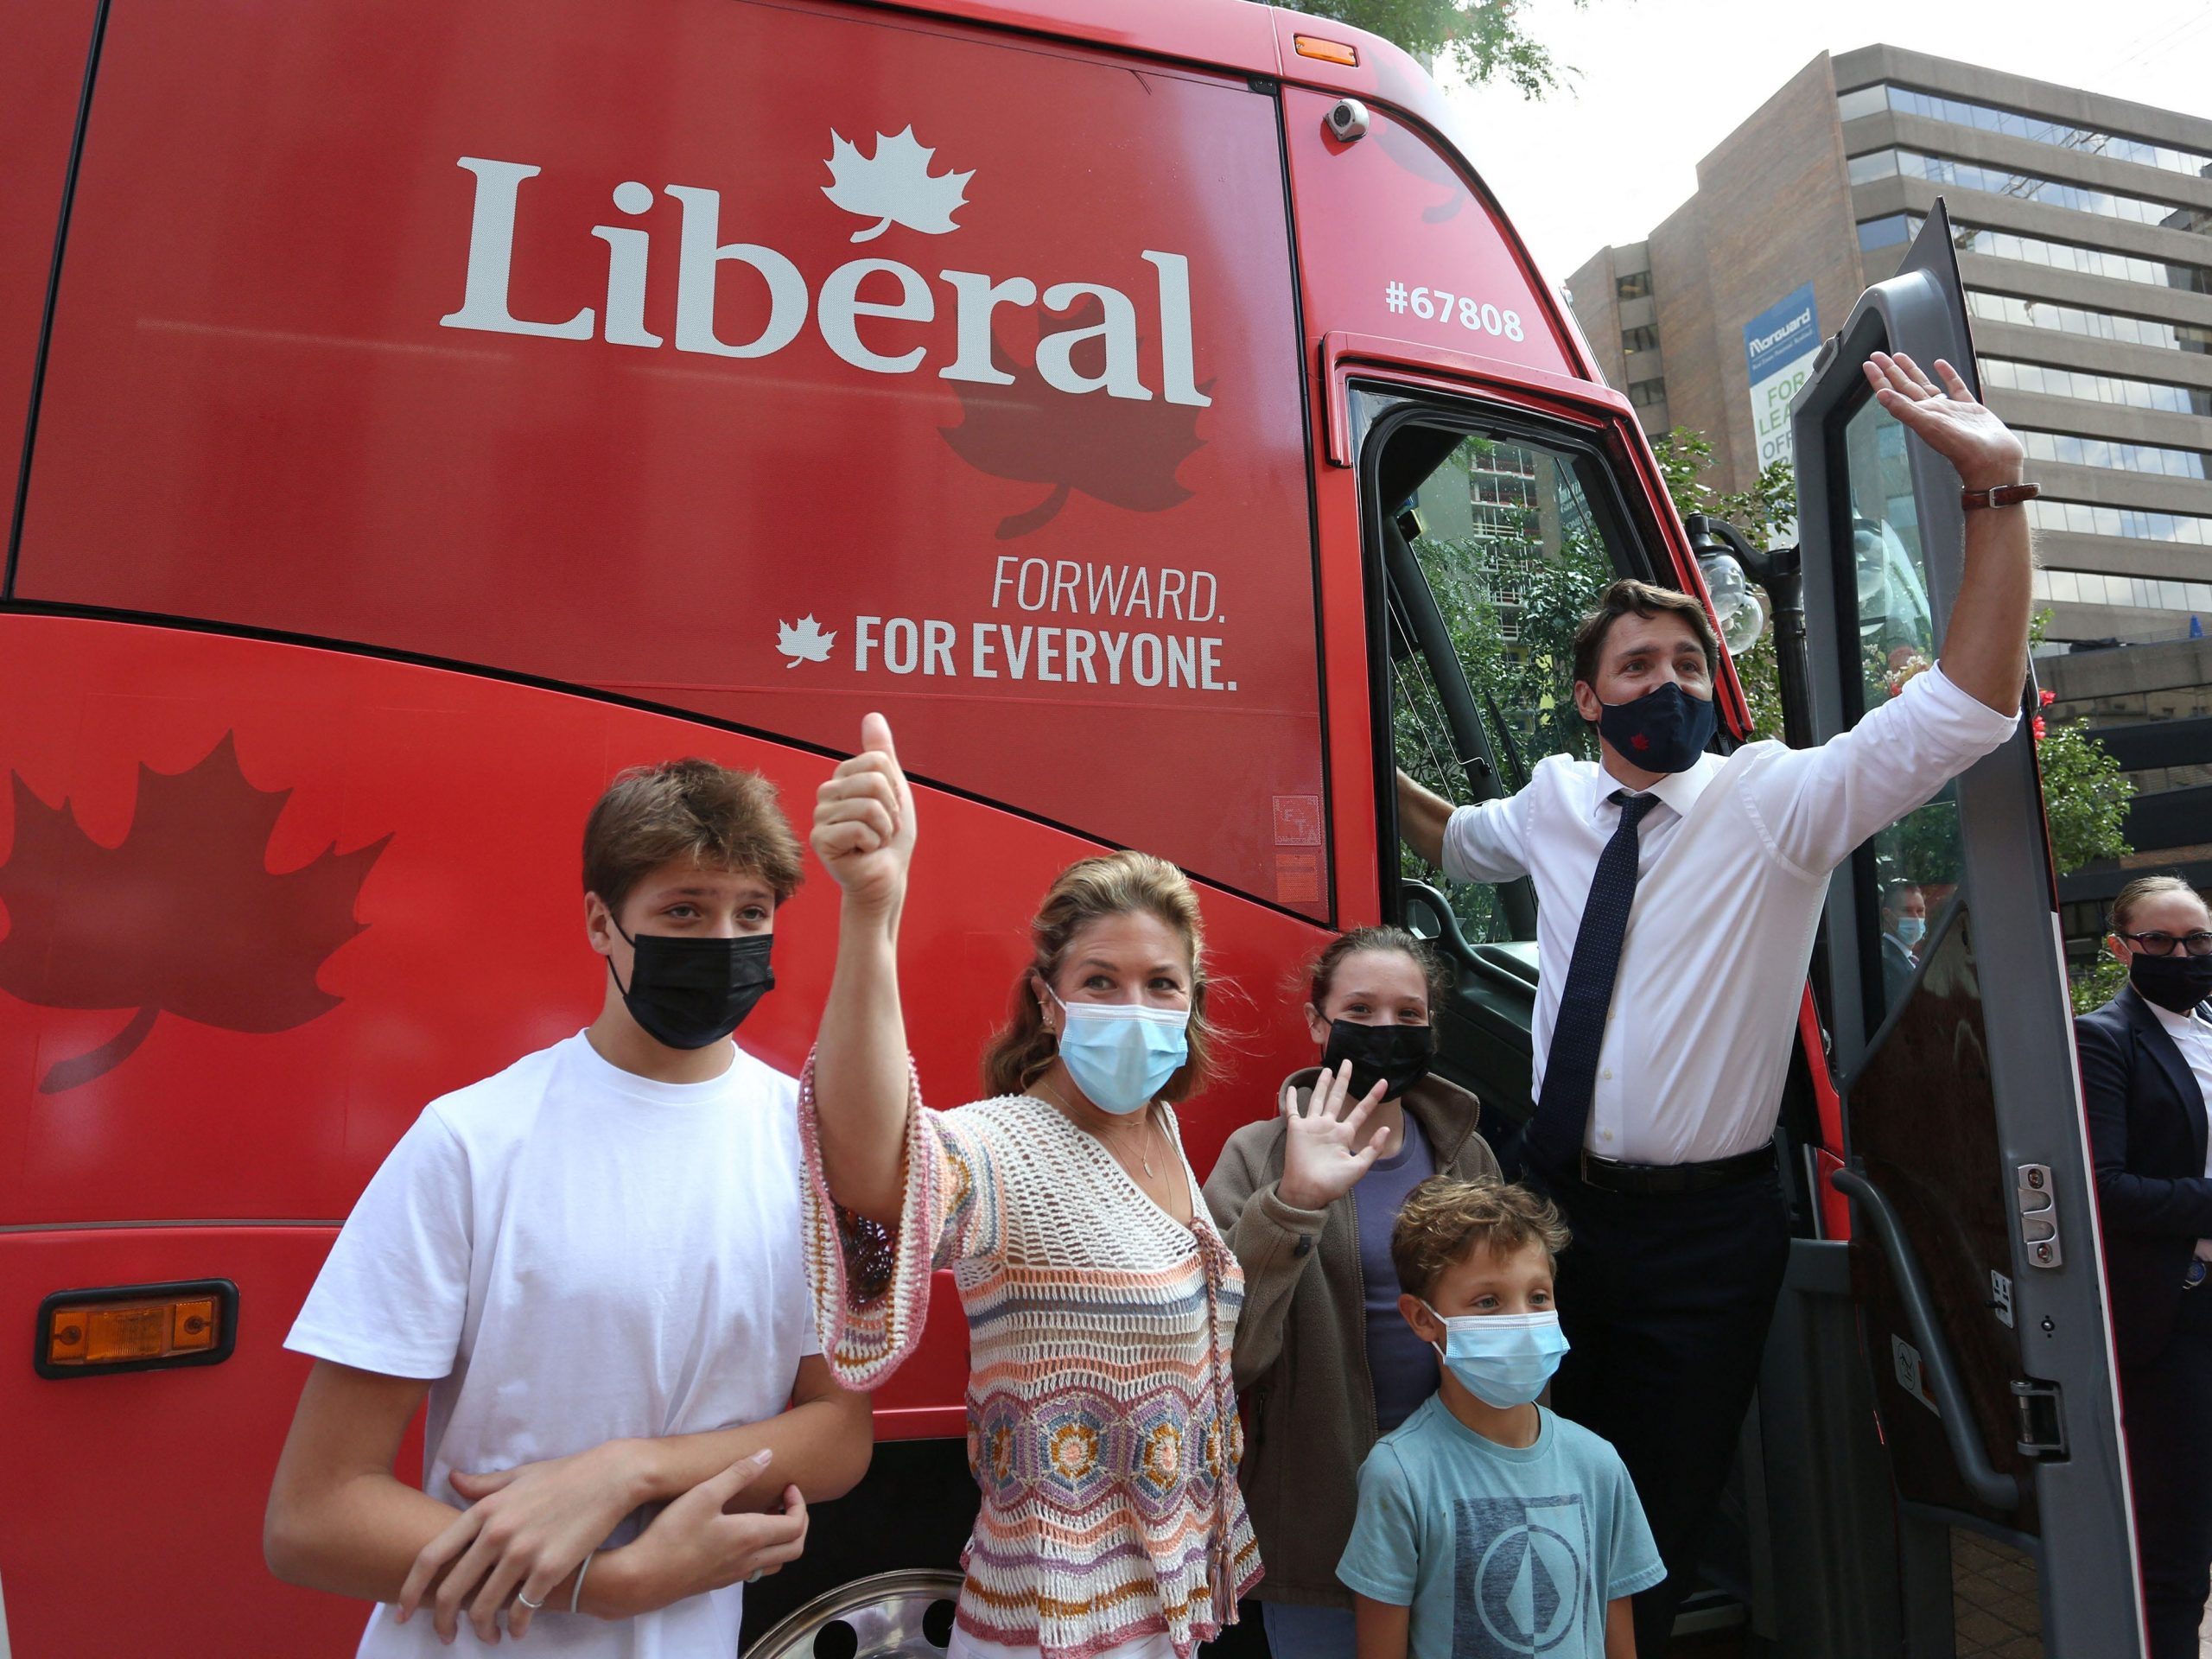 Canada's Prime Minister Justin Trudeau (R), his wife Sophie Gregoire Trudeau and their children Xavier (L-R), Ella-Grace and Hadrien waves to supporters while boarding his campaign bus on August 15, 2021 in Ottawa, Canada.